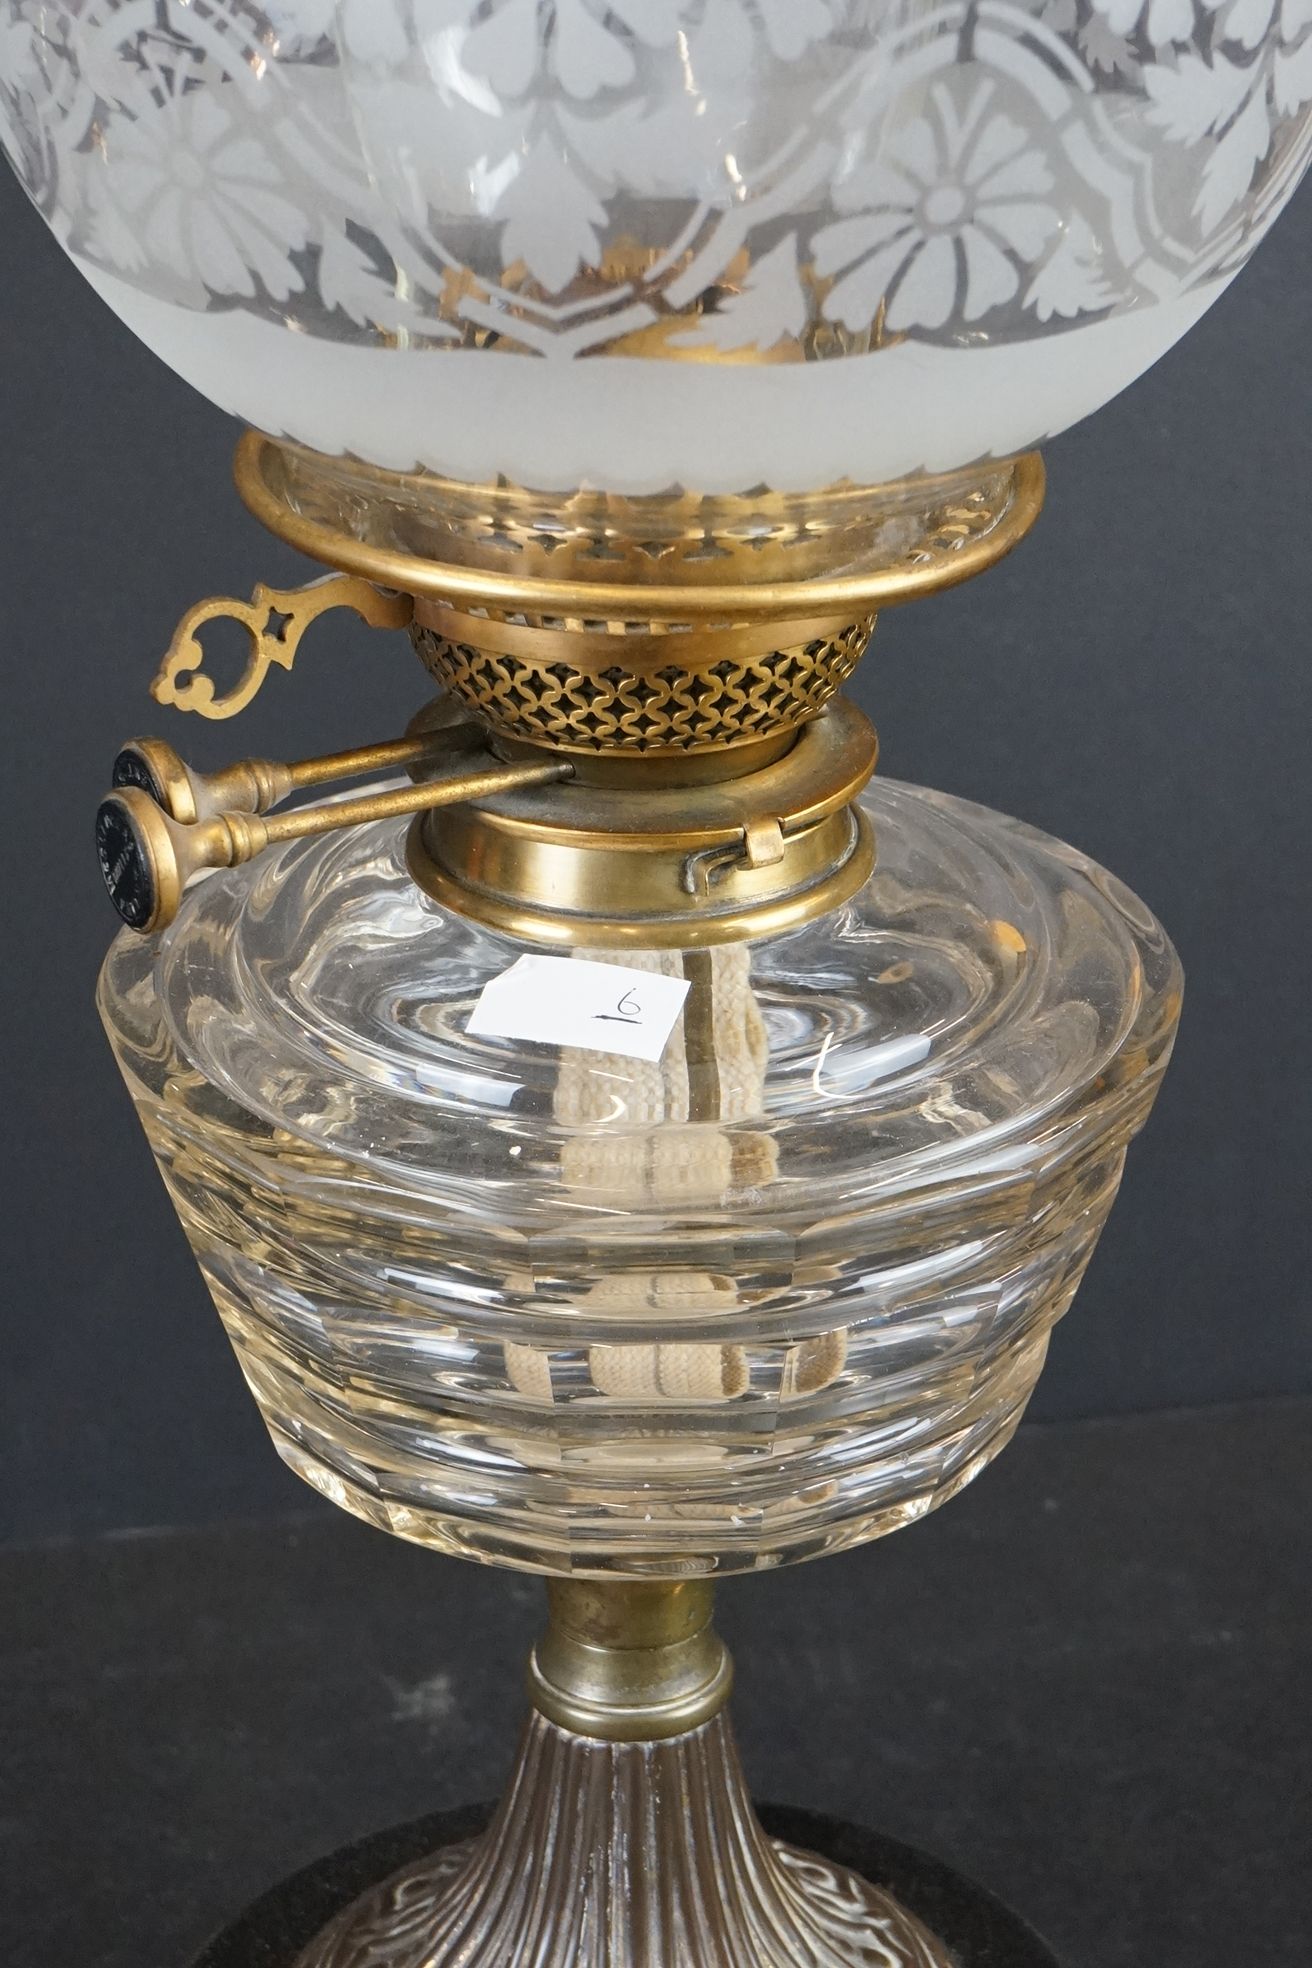 Late 19th / Early 20th century oil lamp with clear cut glass layered pattern font, brass base with - Image 2 of 3